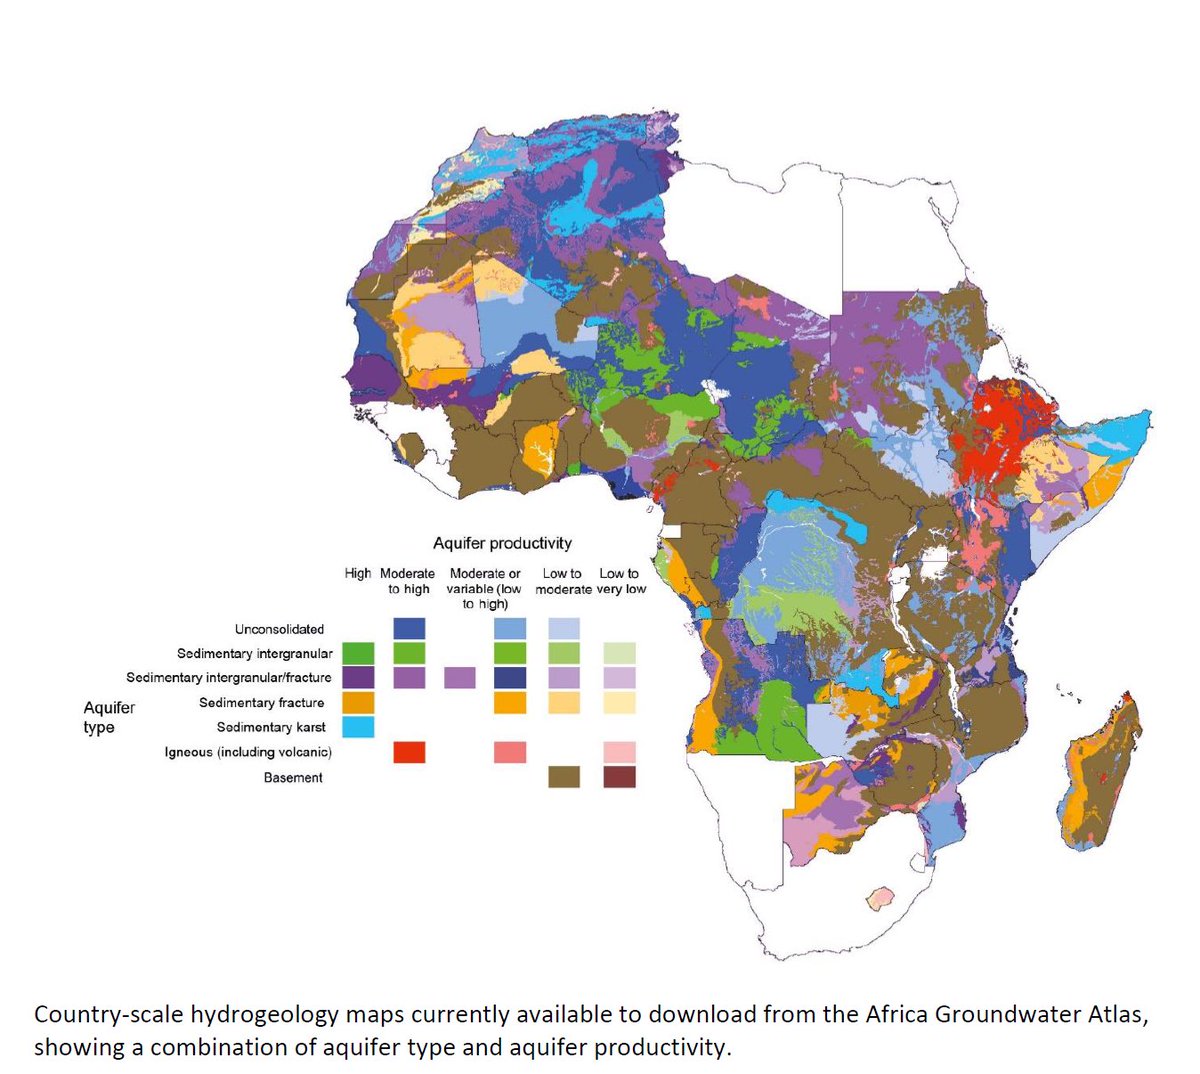 A map from Africa groundwater atlas showing a combination of aquifer type and aquifer productivity #gischat